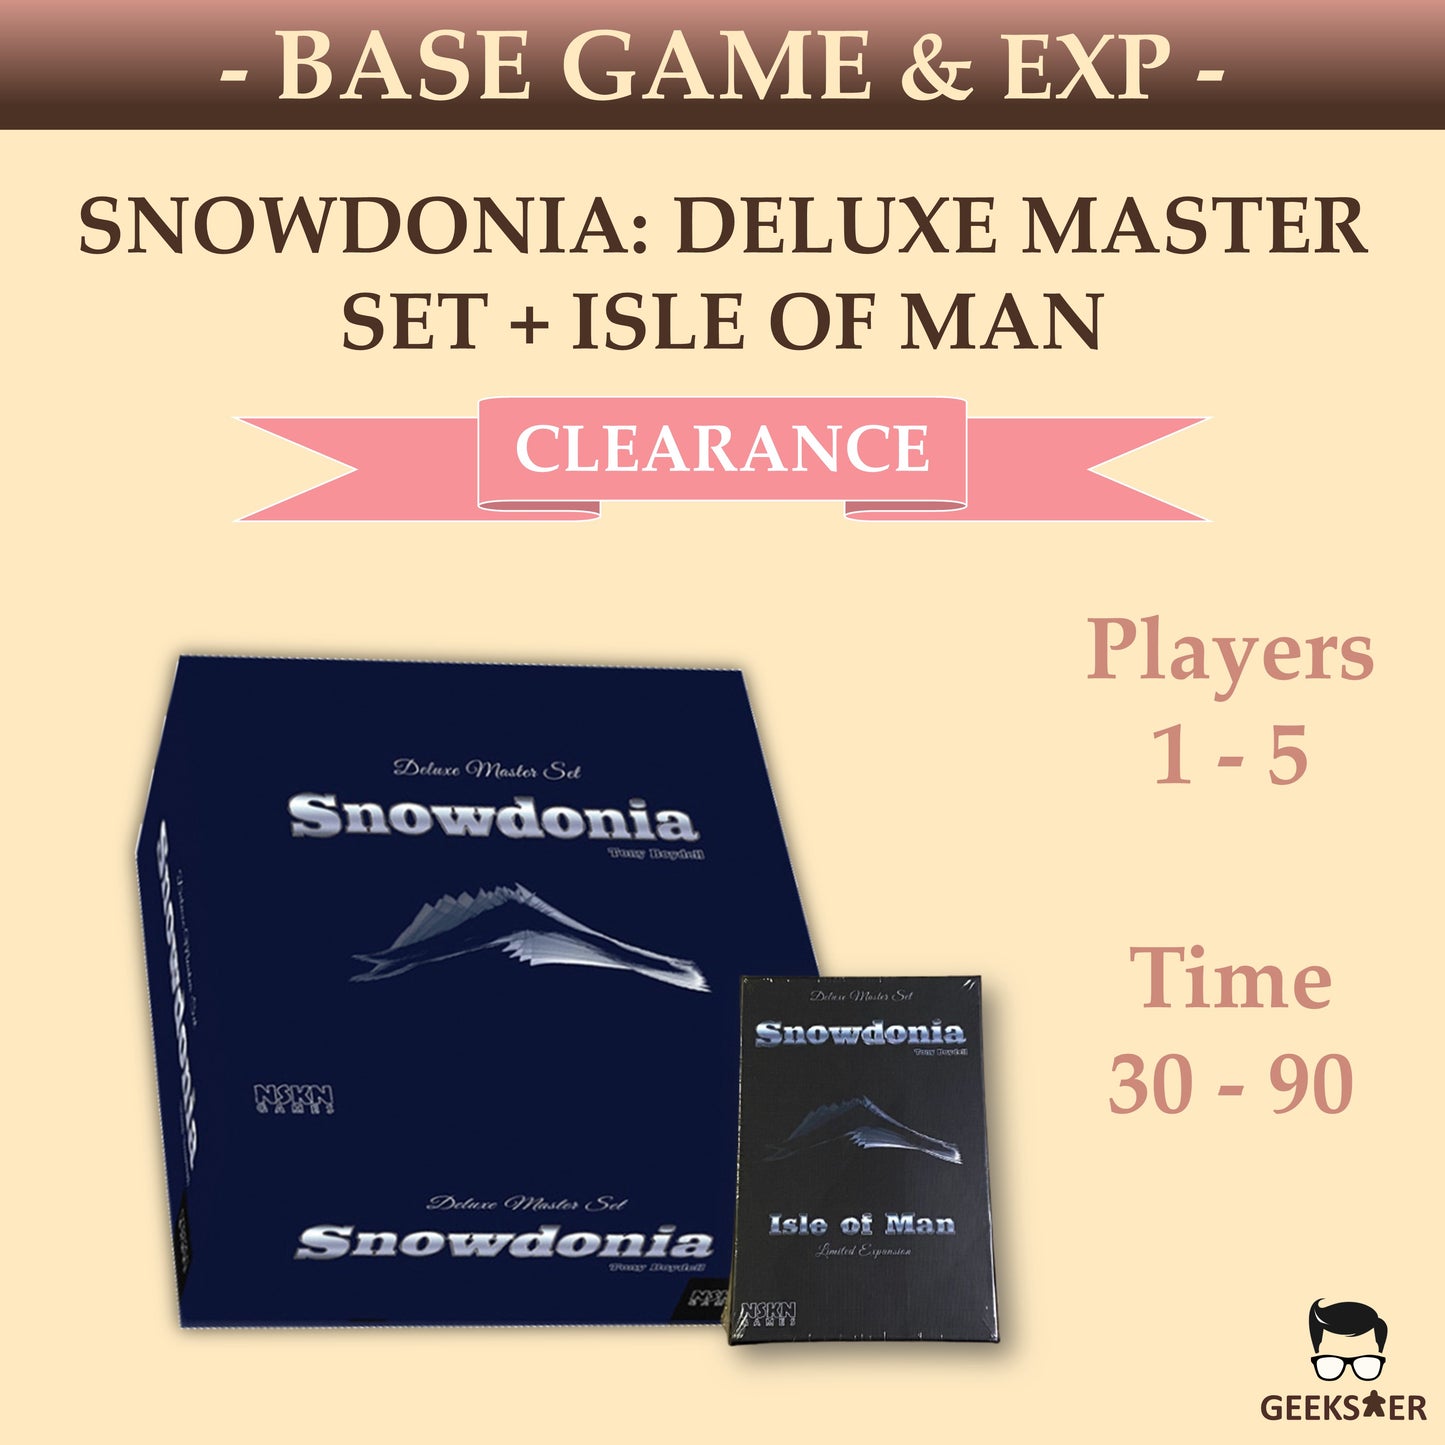 Snowdonia: Deluxe Master Set with Isle of Man